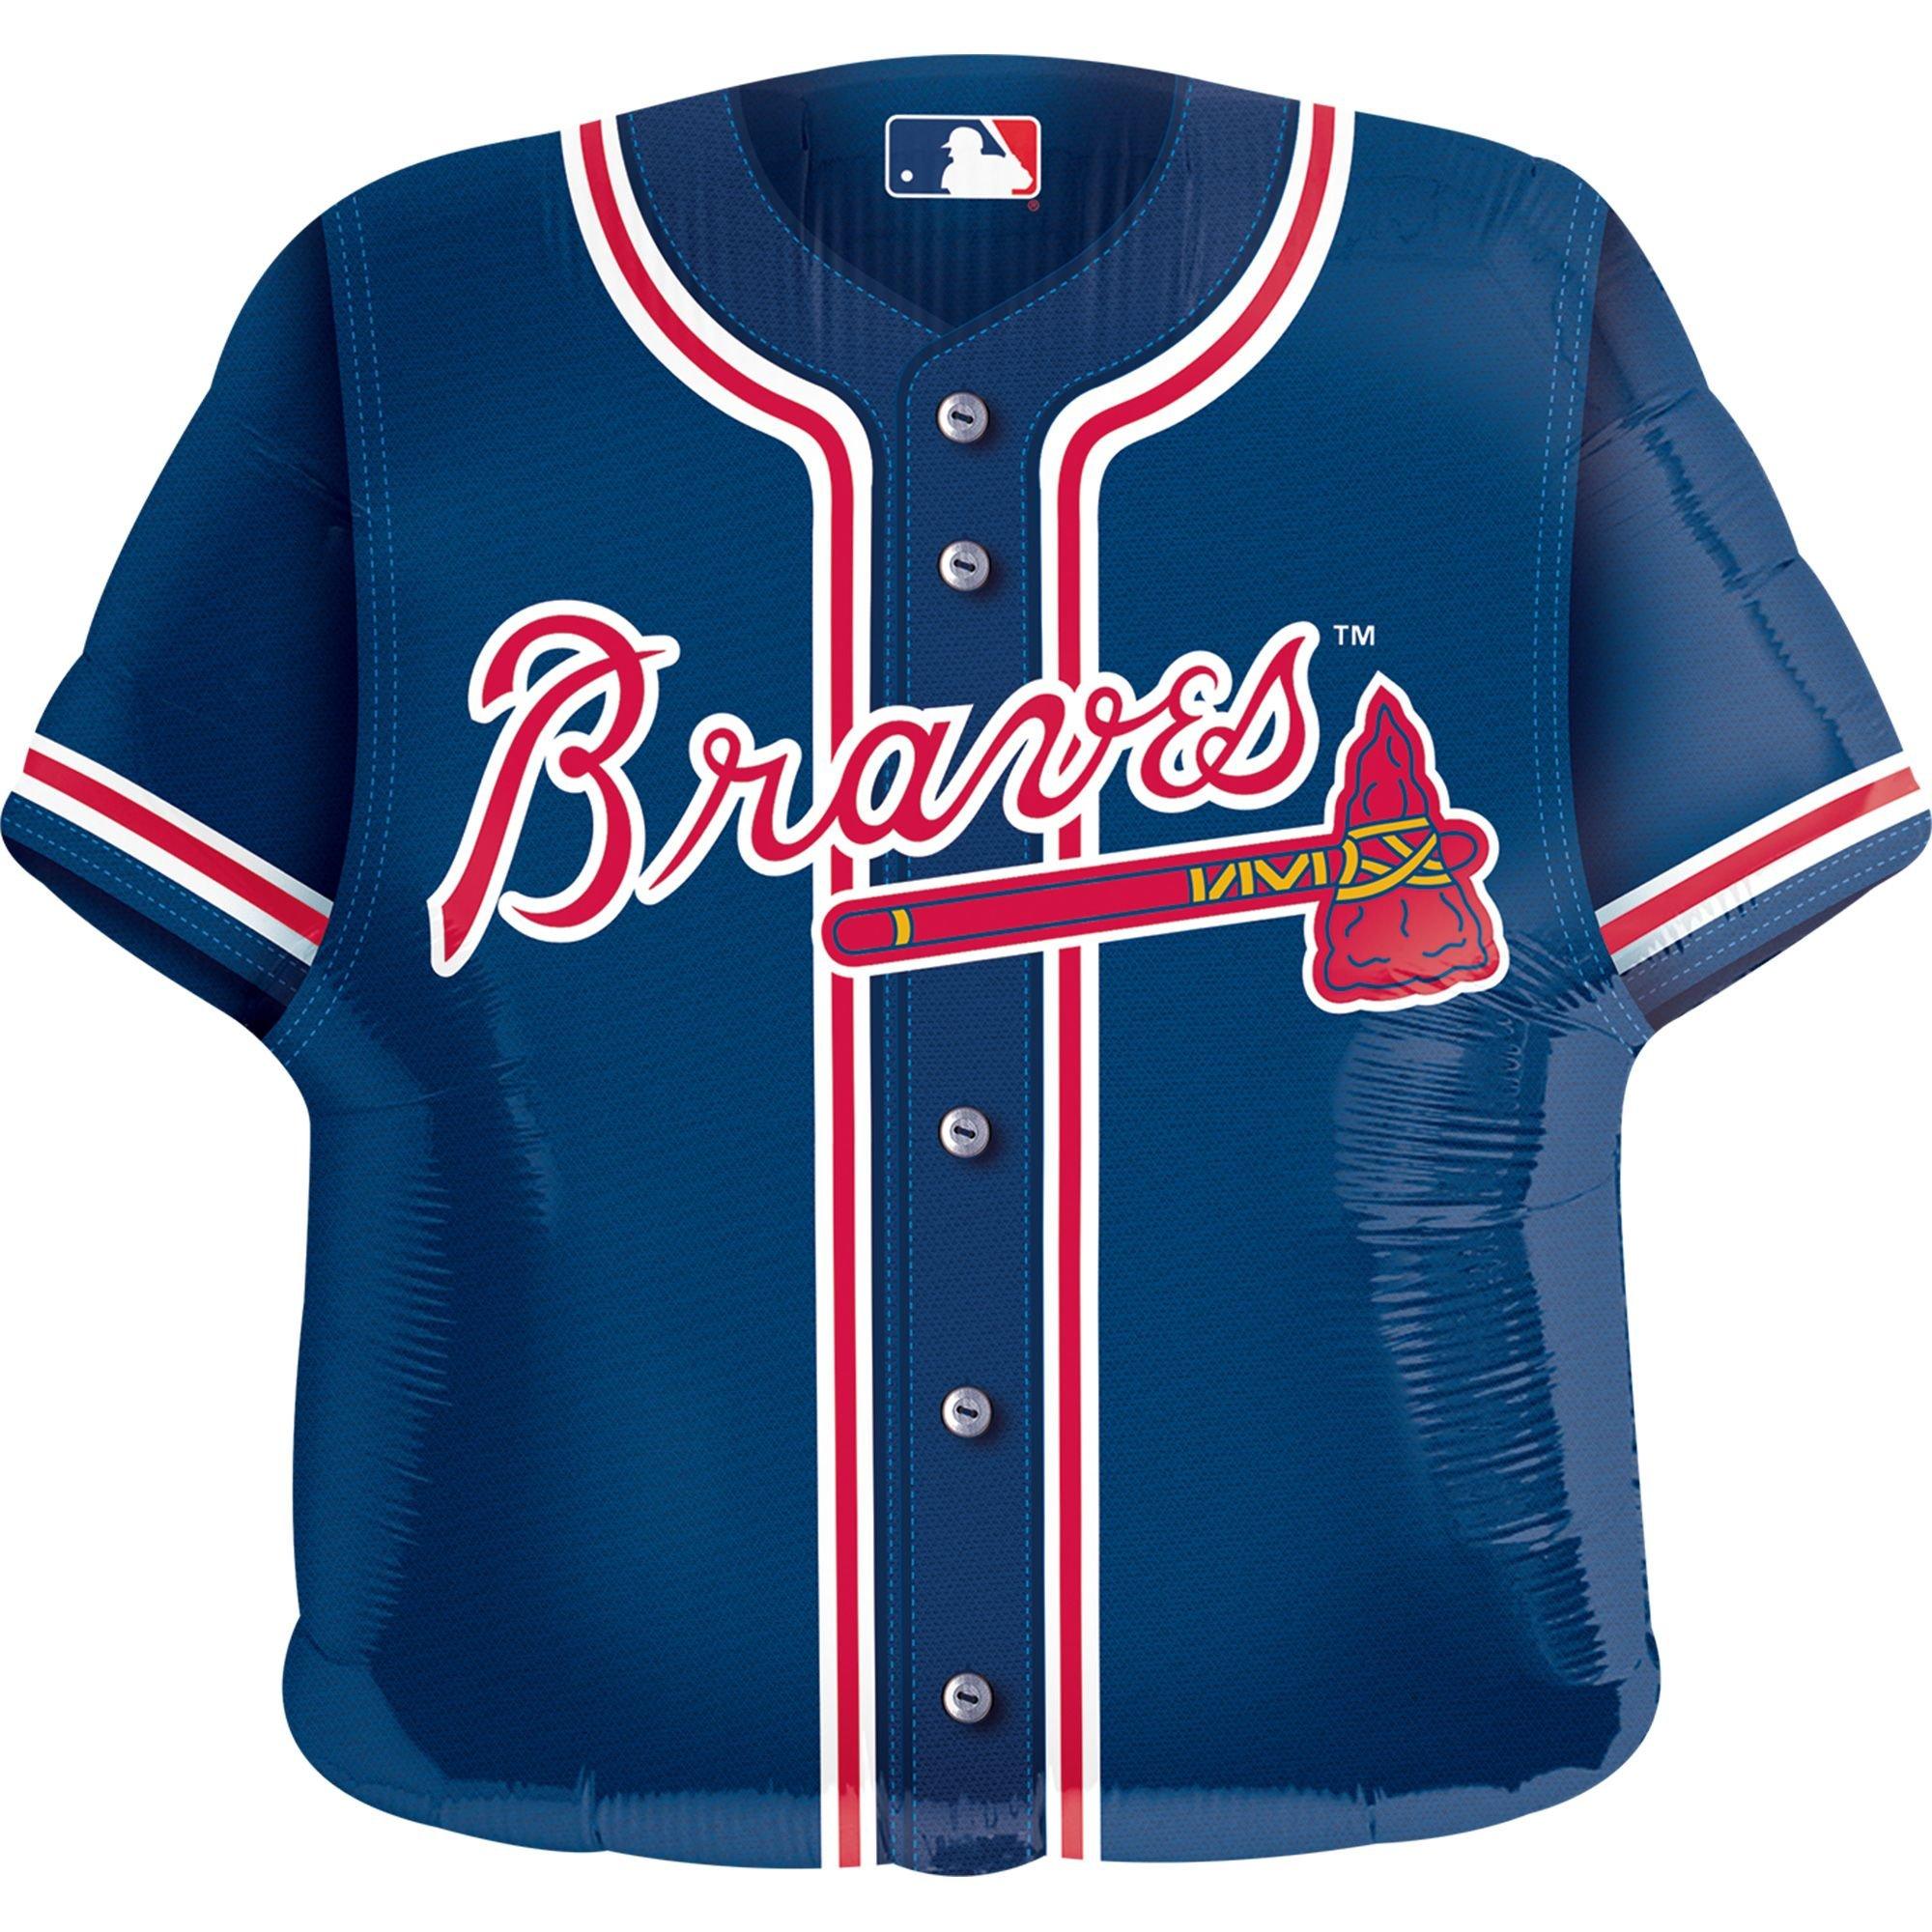 Atlanta Braves - A Town Jersey Concept in MLB The Show